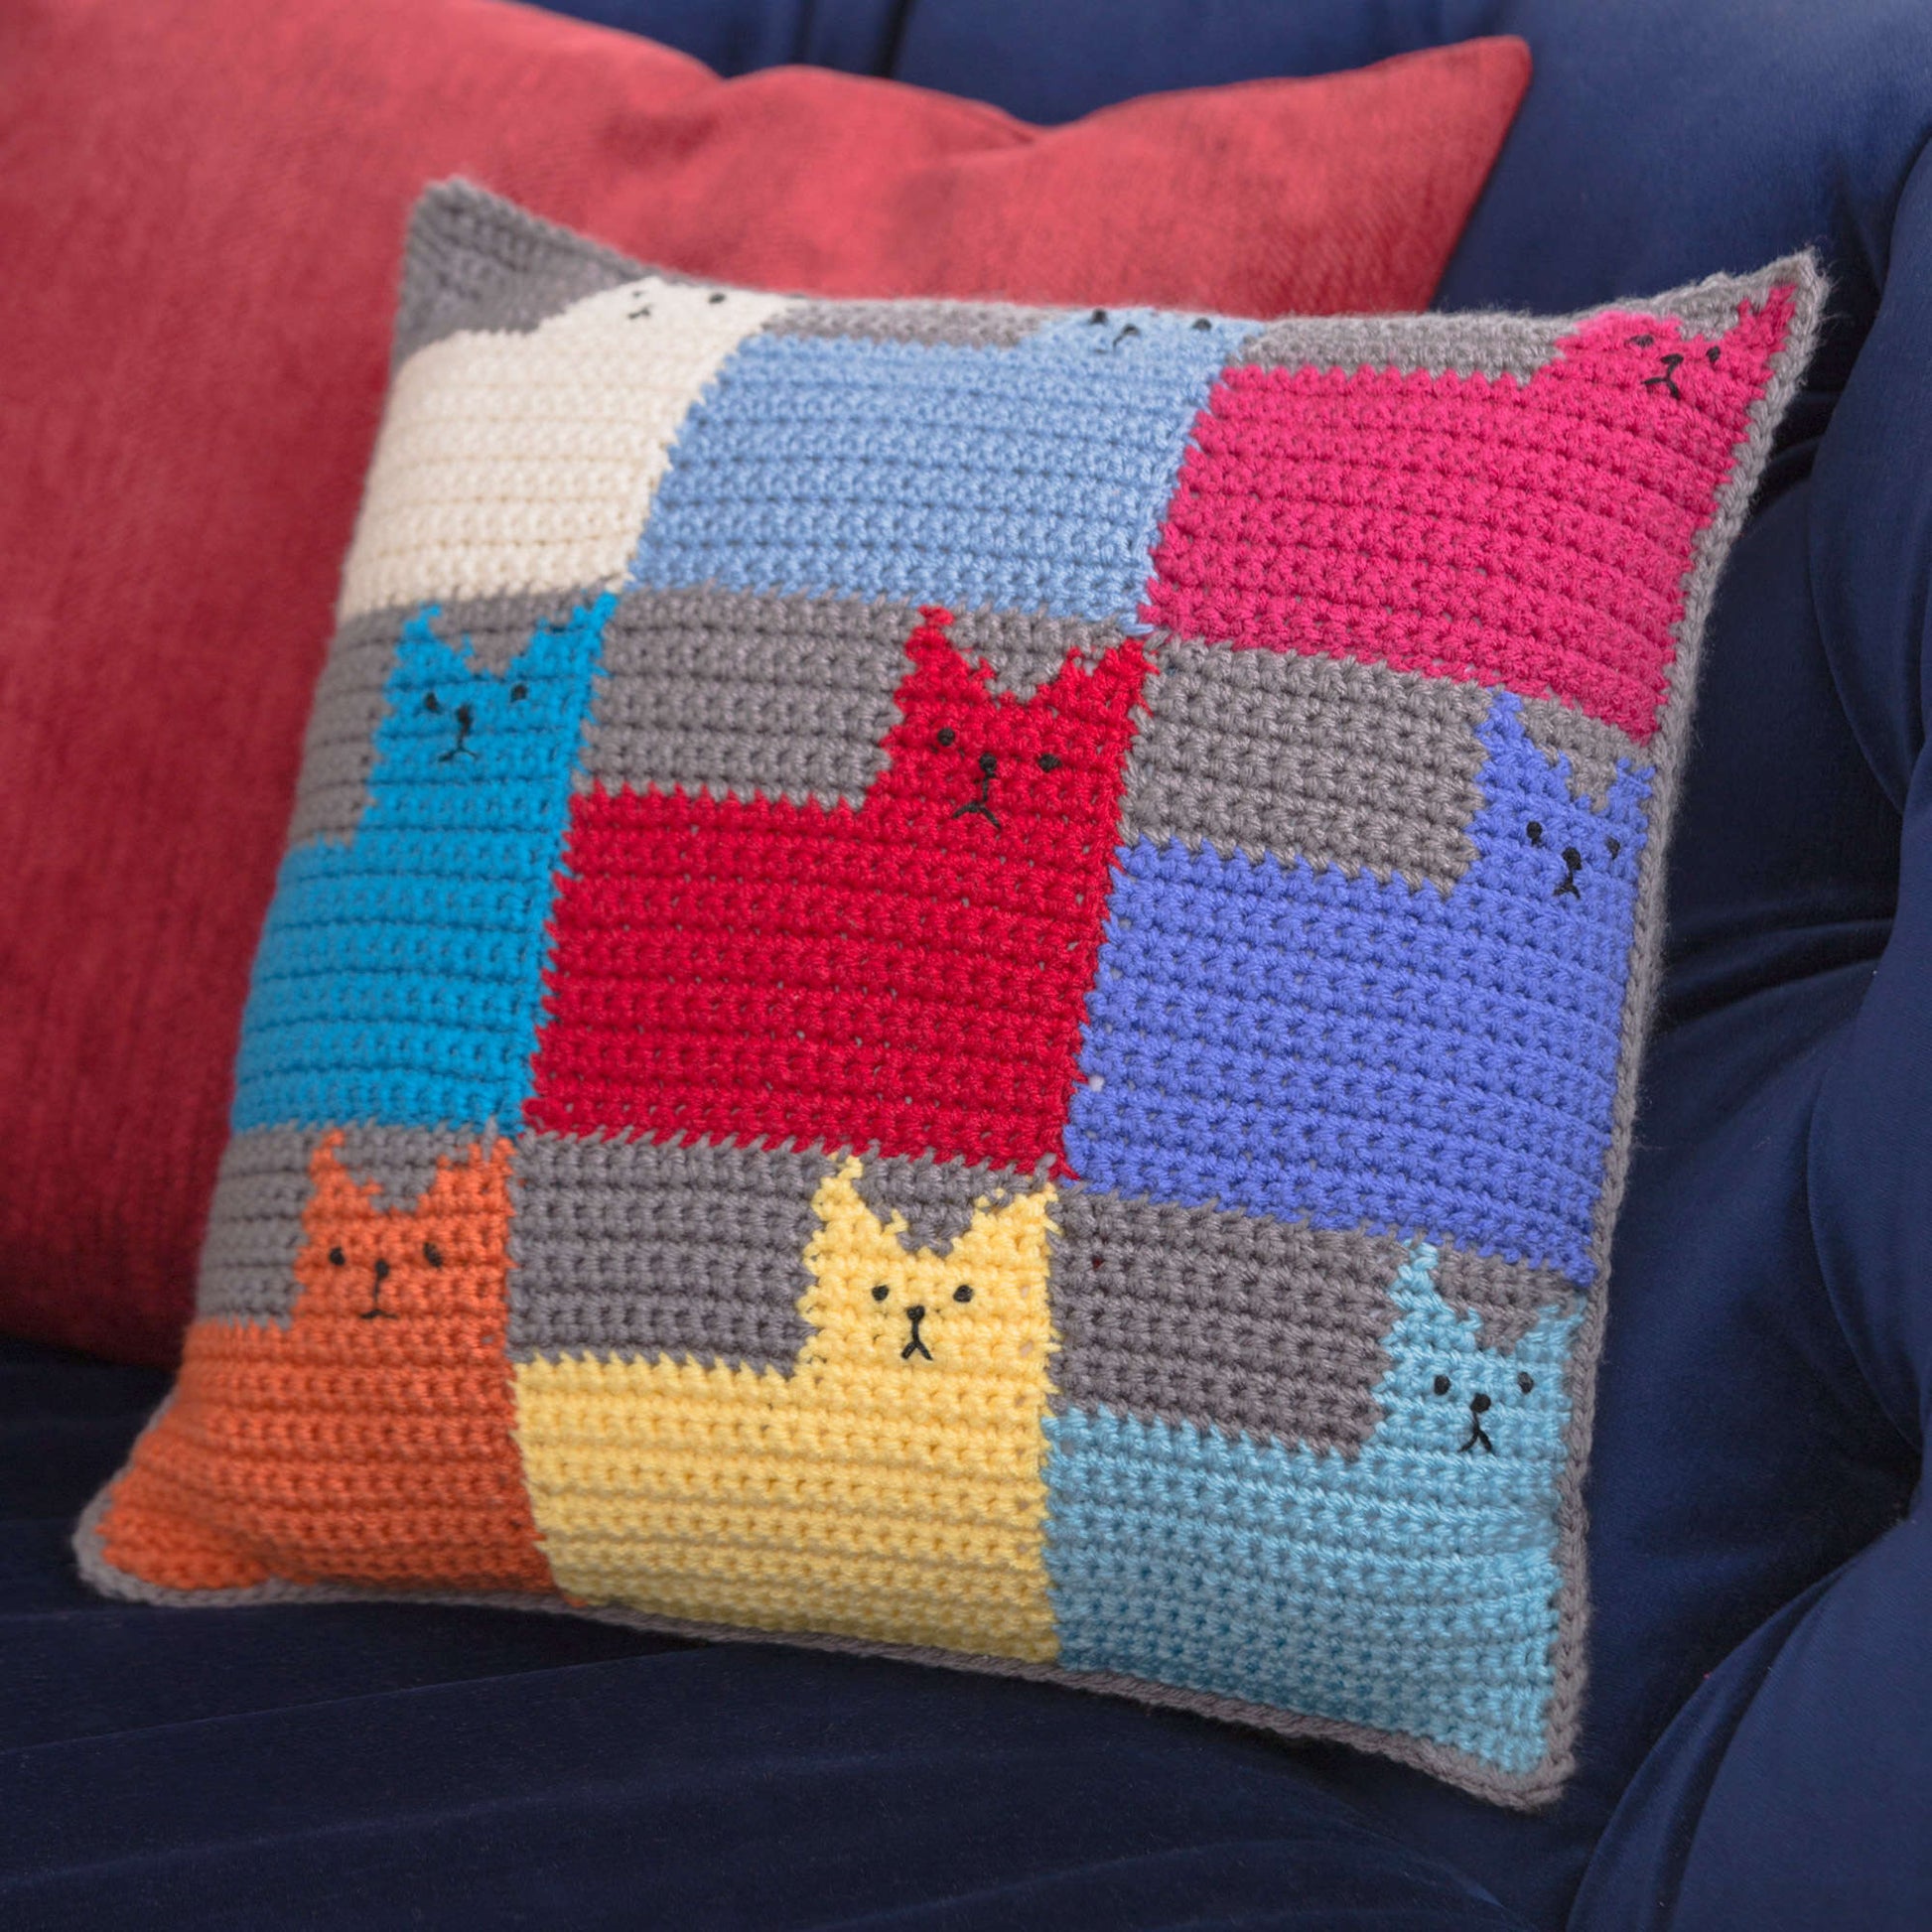 Free Red Heart Crochet Kittens And Puppies For Sale Pillows Pattern